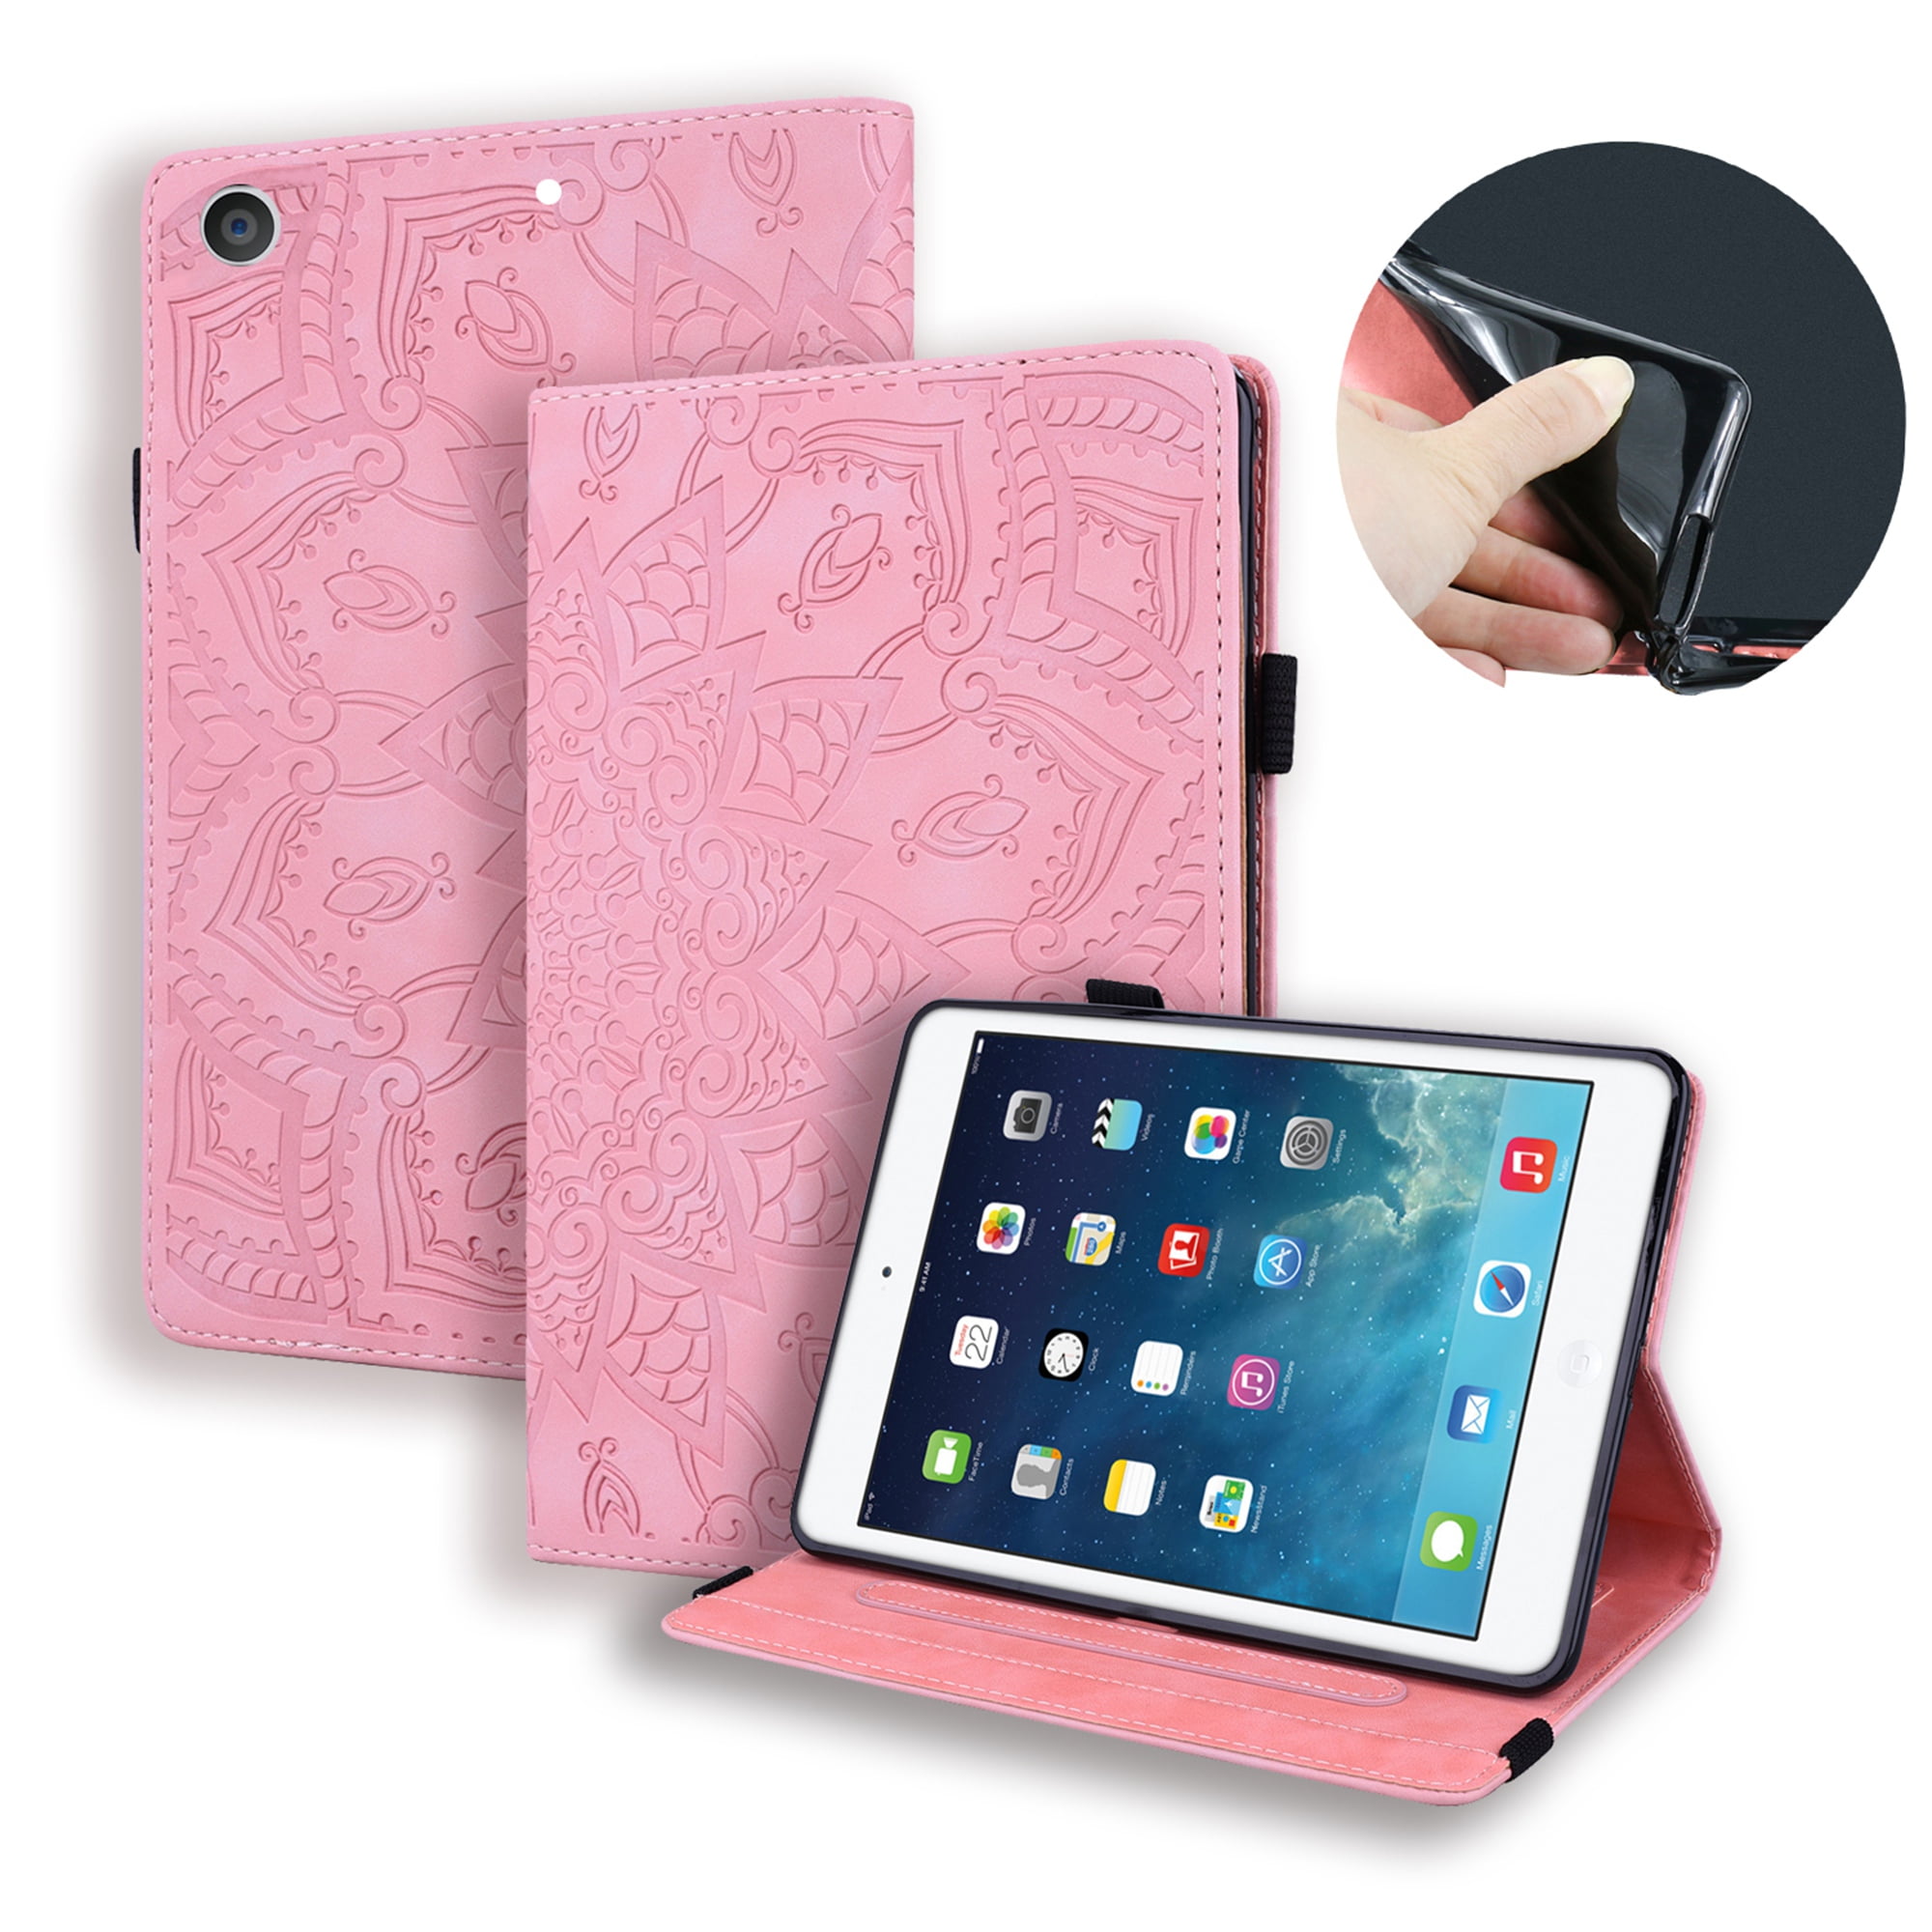 New Premium Soft Leather Wallet Flip Folio Smart Stand Case Cover For Apple iPad 